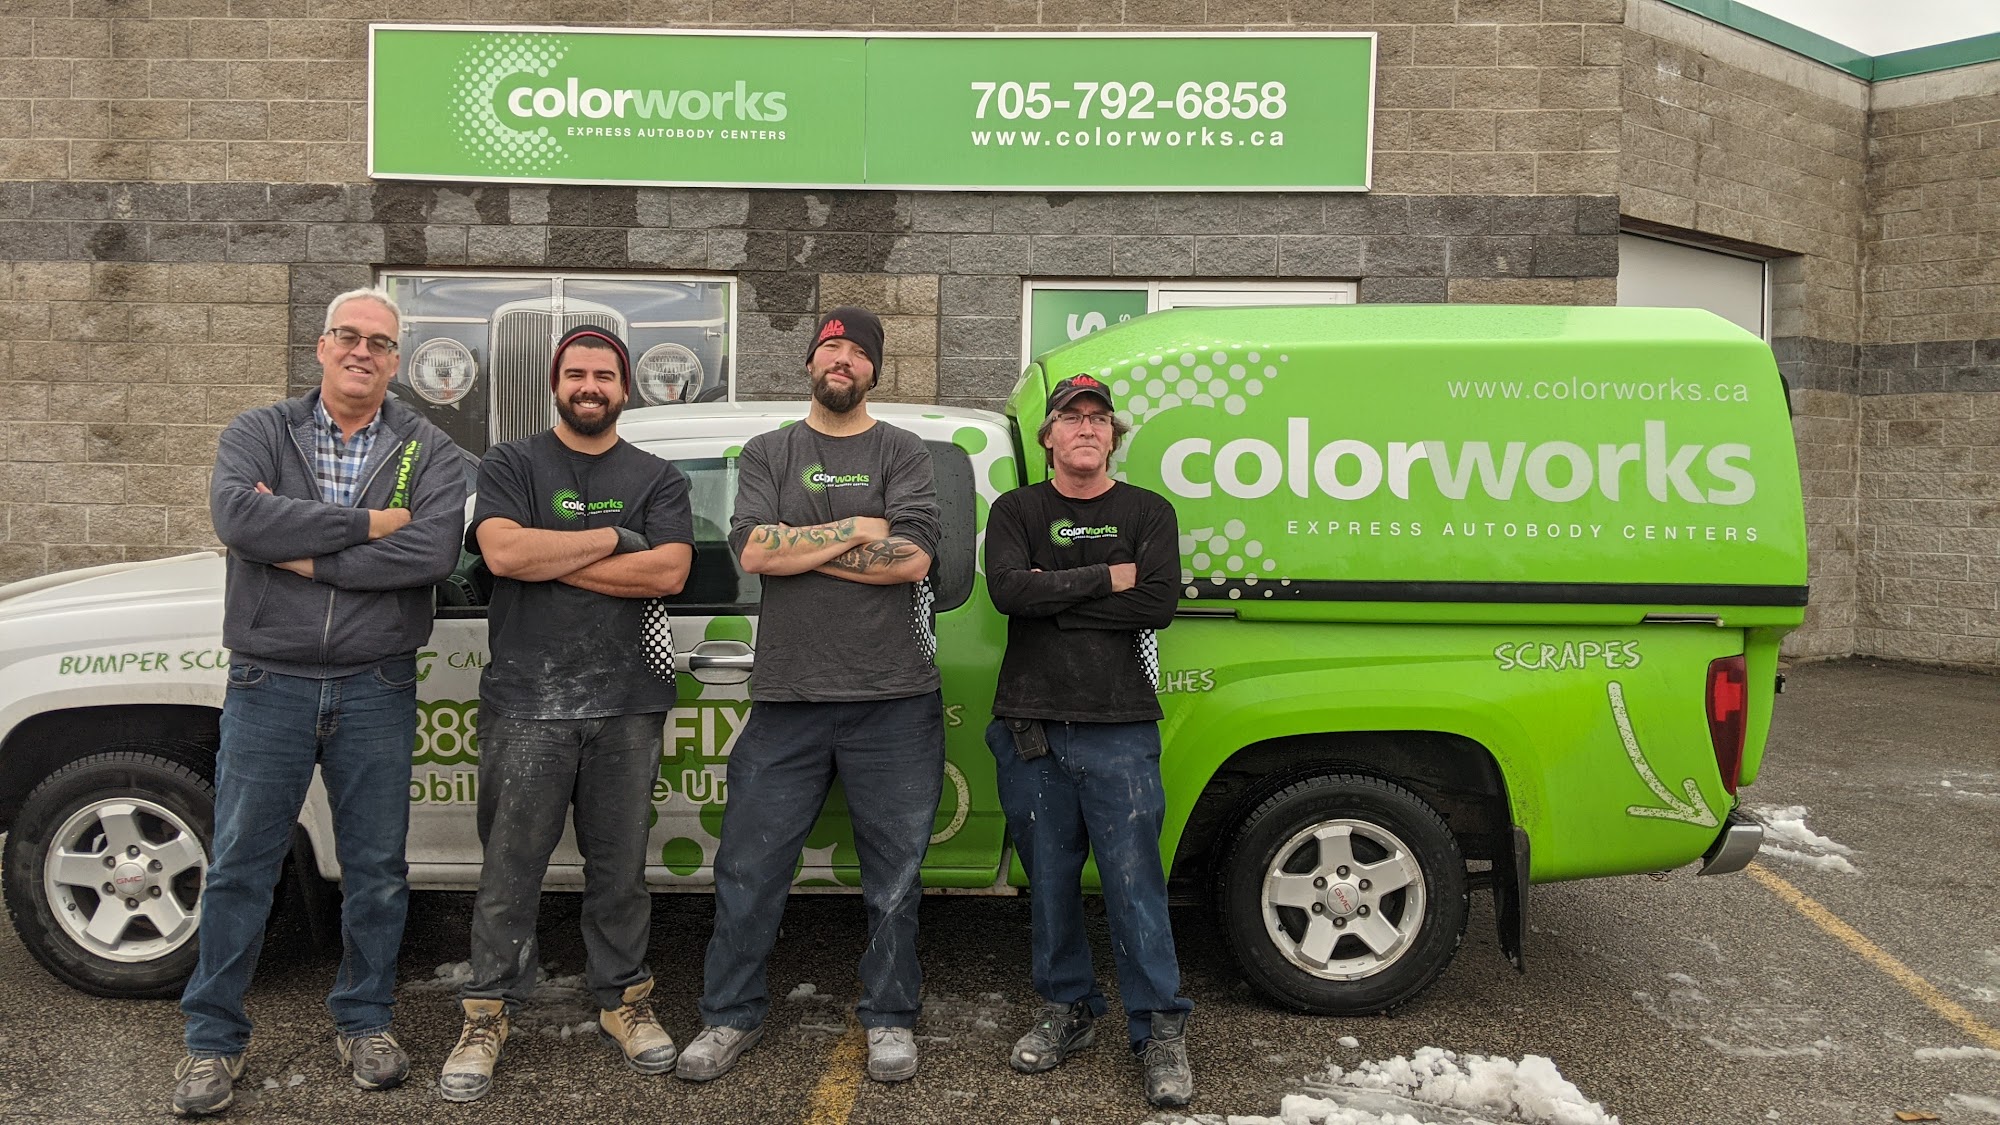 Colorworks Express Autobody Barrie